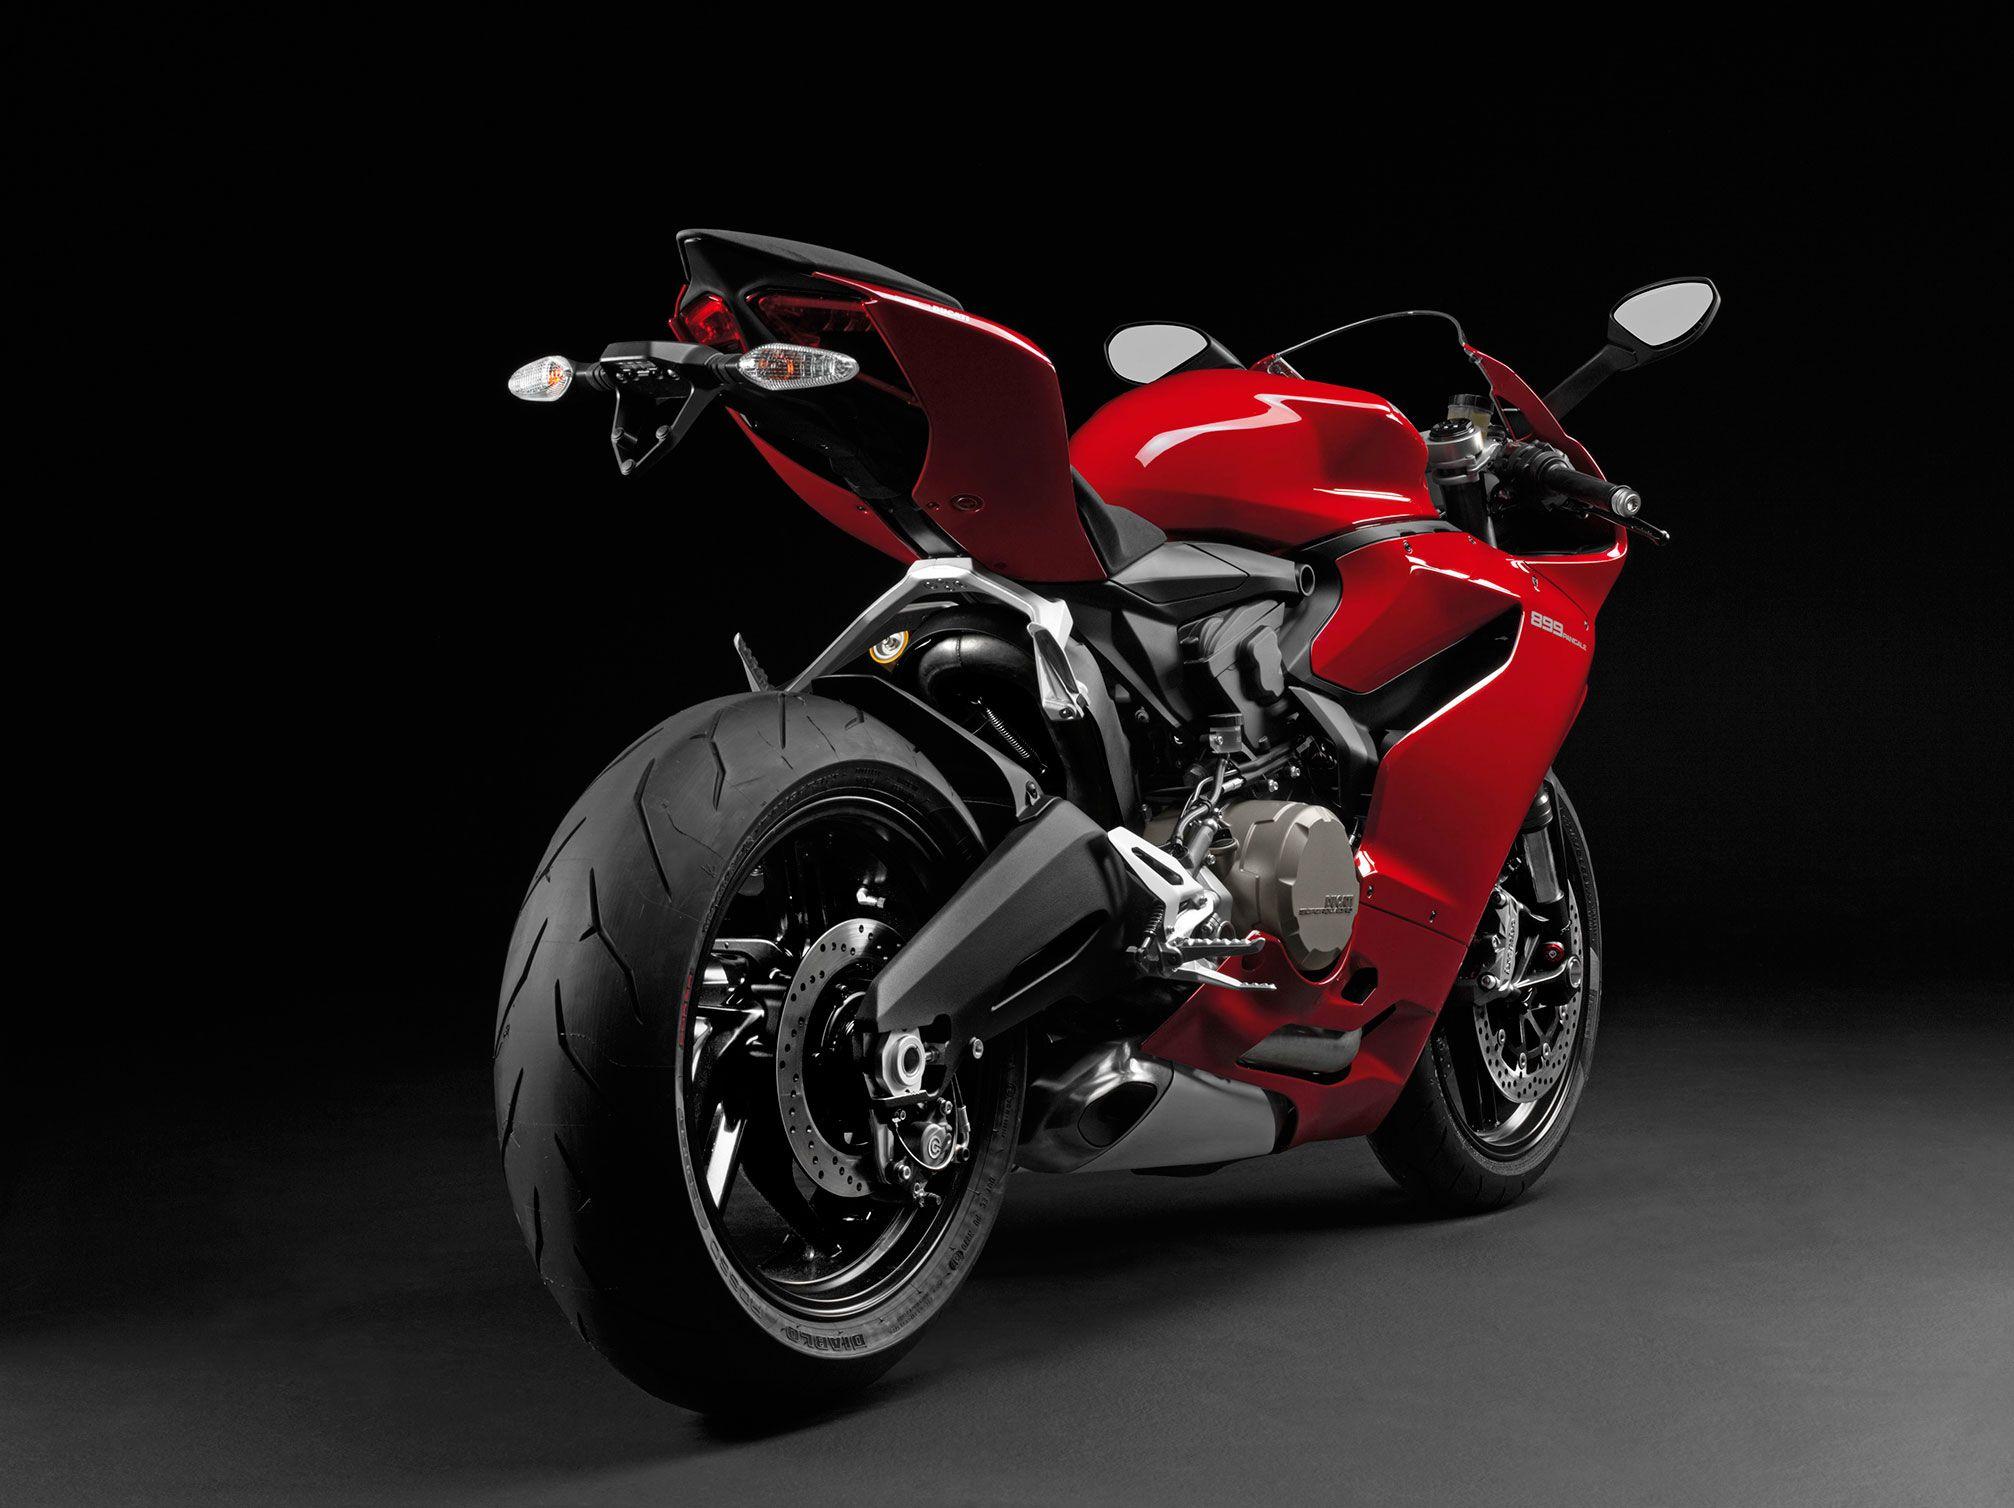 Ducati 899 Panigale BackView 1280x720 Wallpaper. REF: MAD ENGINE